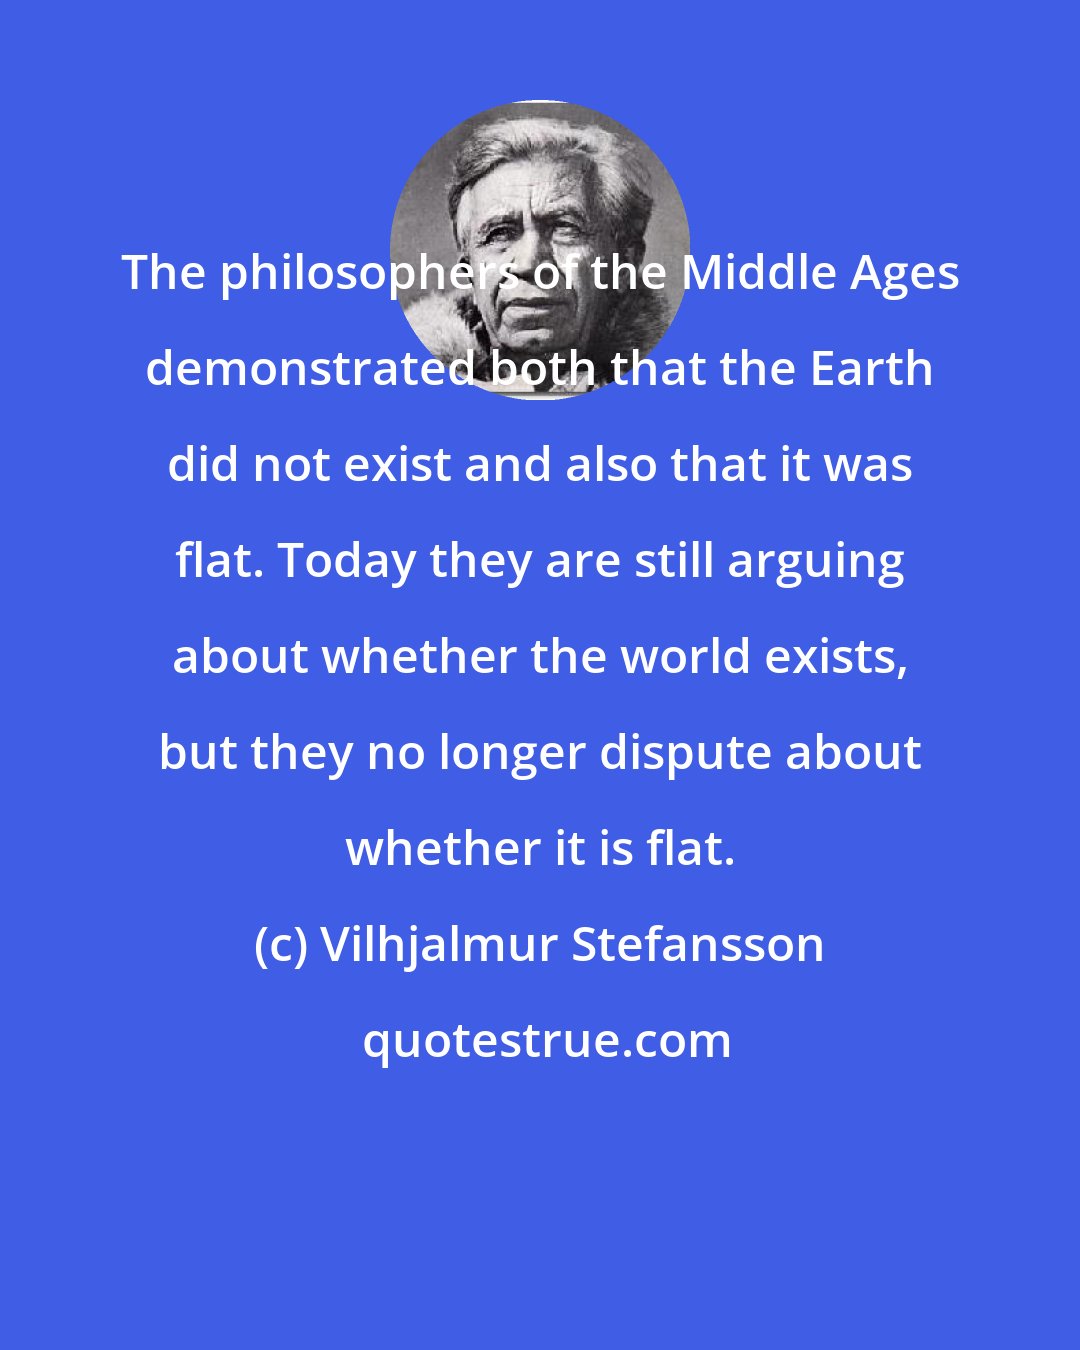 Vilhjalmur Stefansson: The philosophers of the Middle Ages demonstrated both that the Earth did not exist and also that it was flat. Today they are still arguing about whether the world exists, but they no longer dispute about whether it is flat.